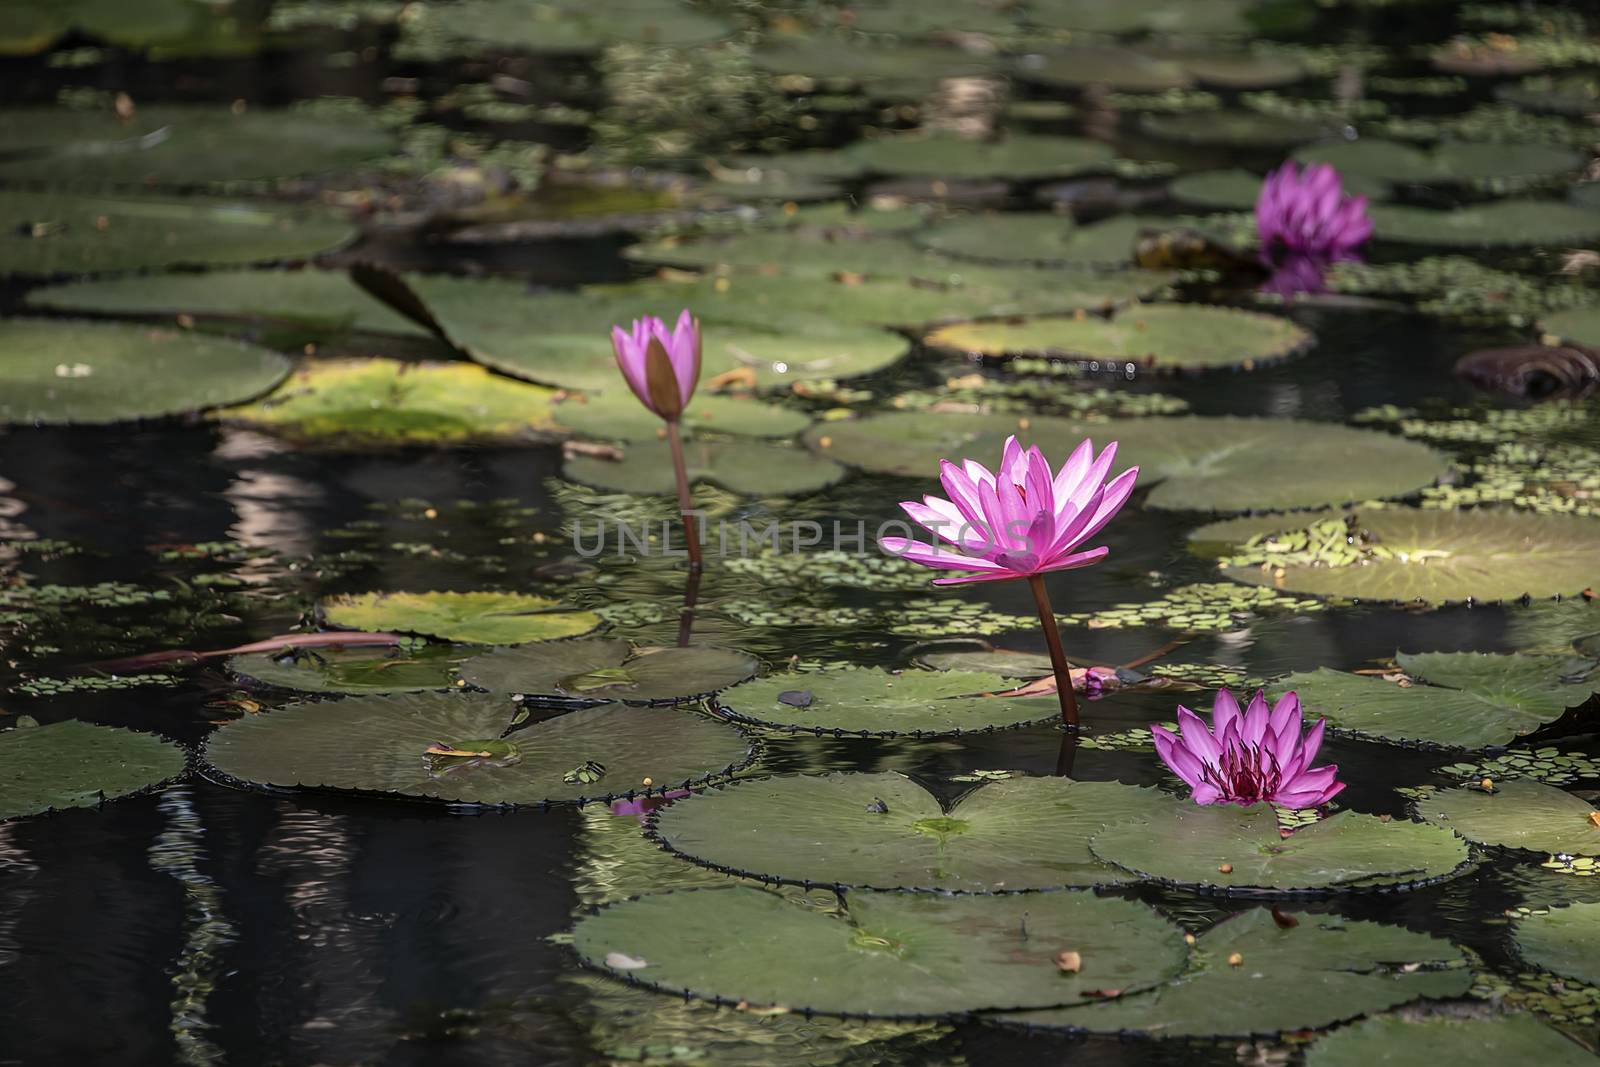 Lotus flower blooming in a reflective pool by mrs_vision